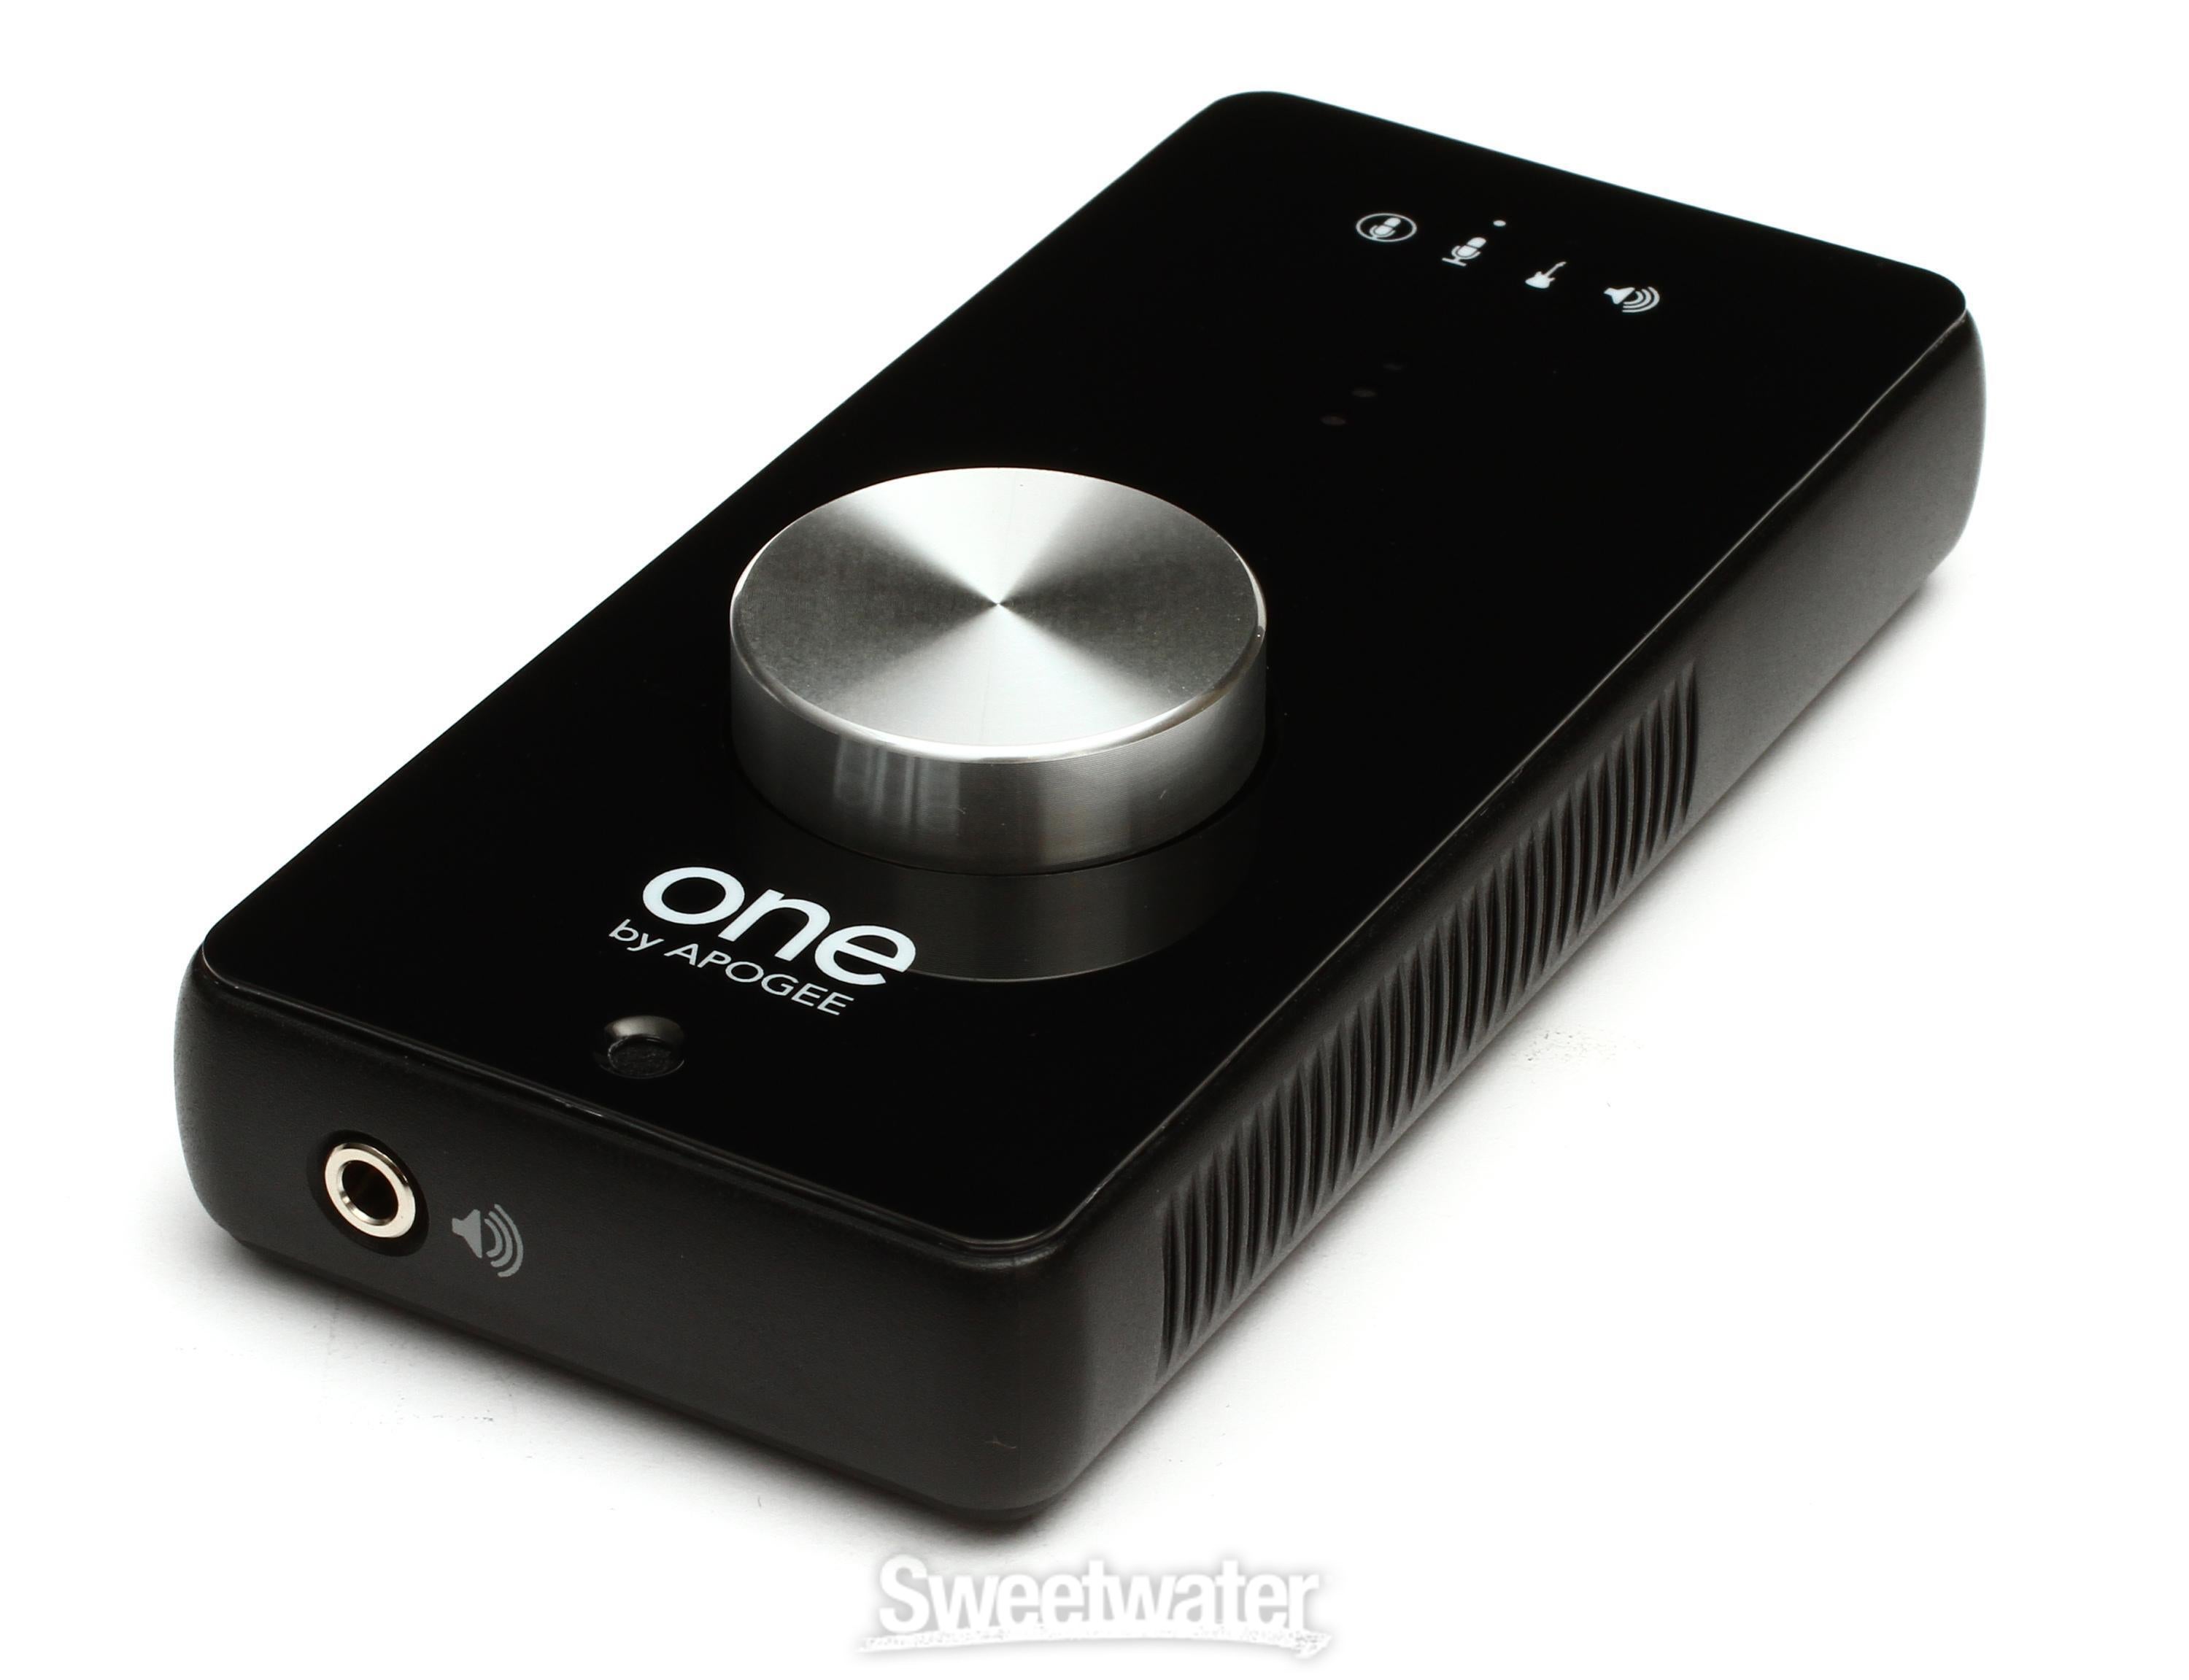 Apogee One | Sweetwater